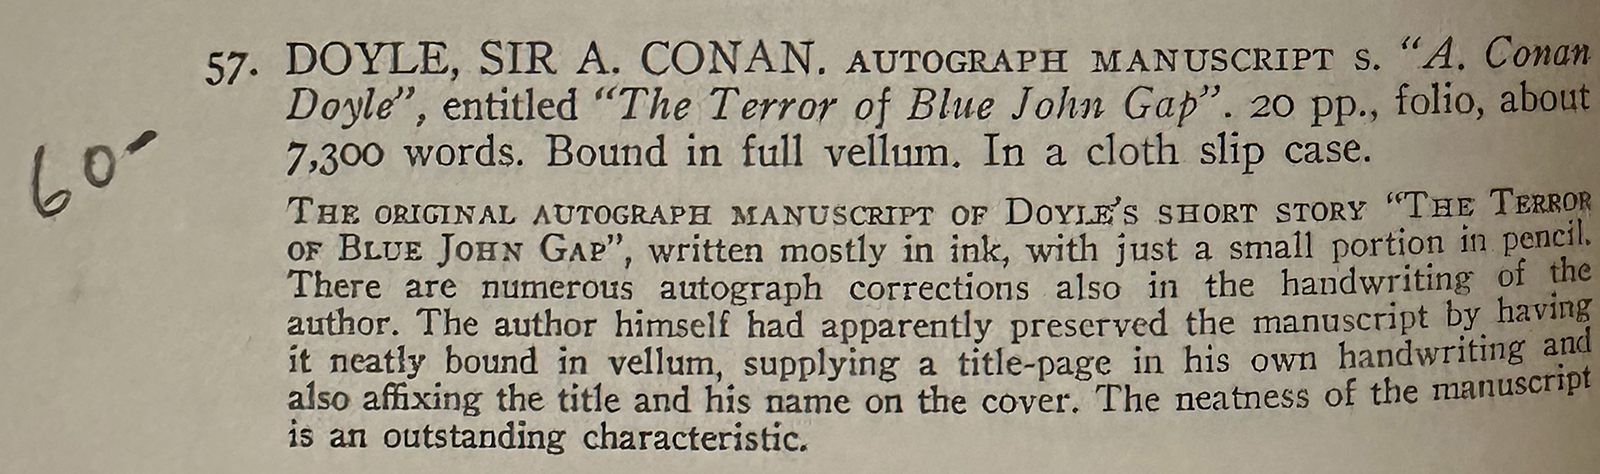 excerpt from auction catalog about The Terror of Blue John Gap